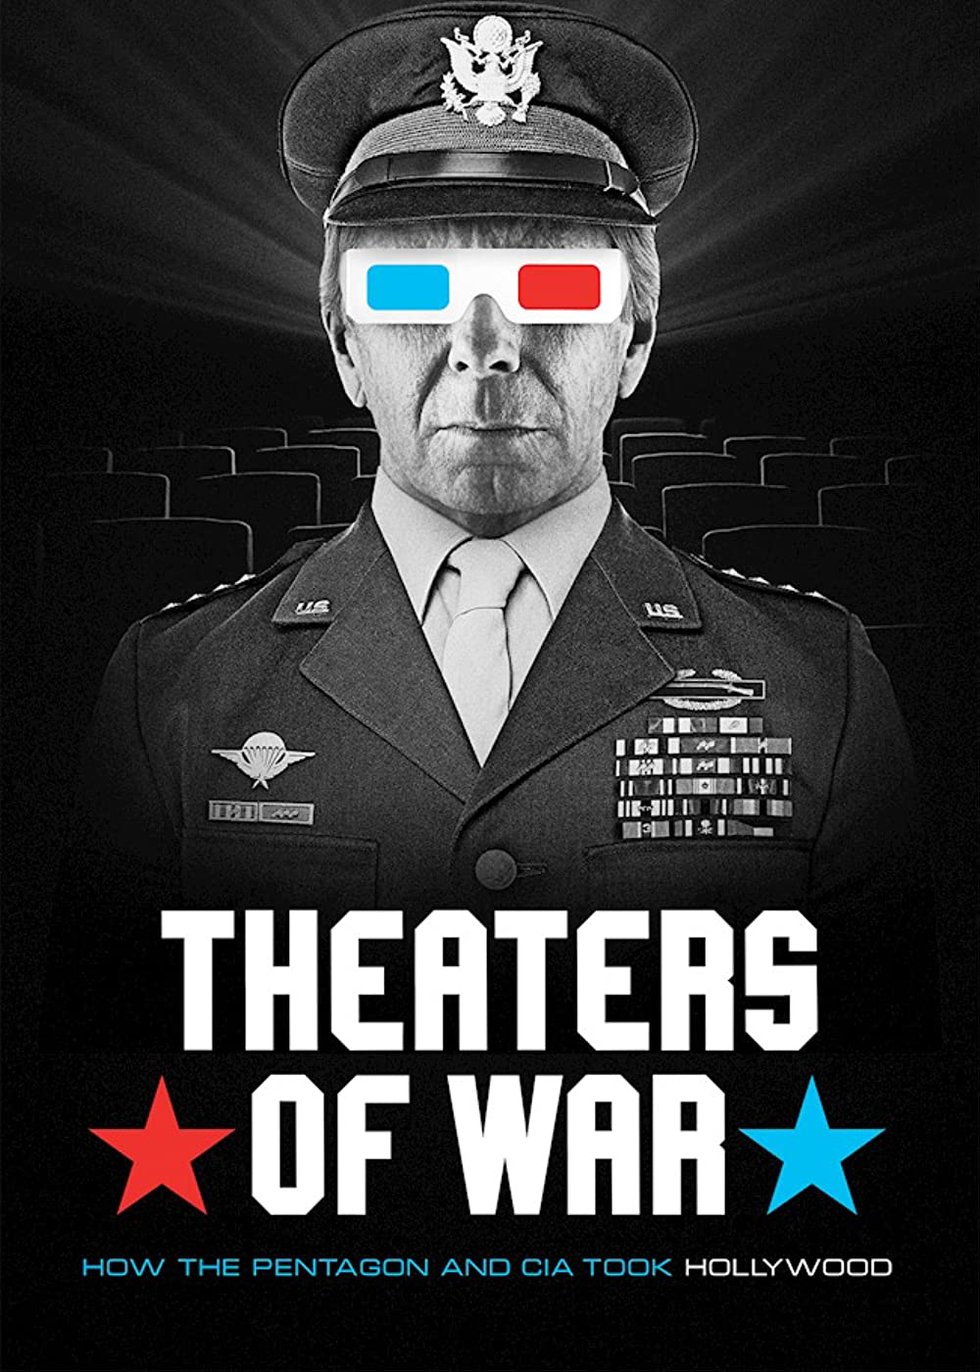 Theaters of War Political Documentary